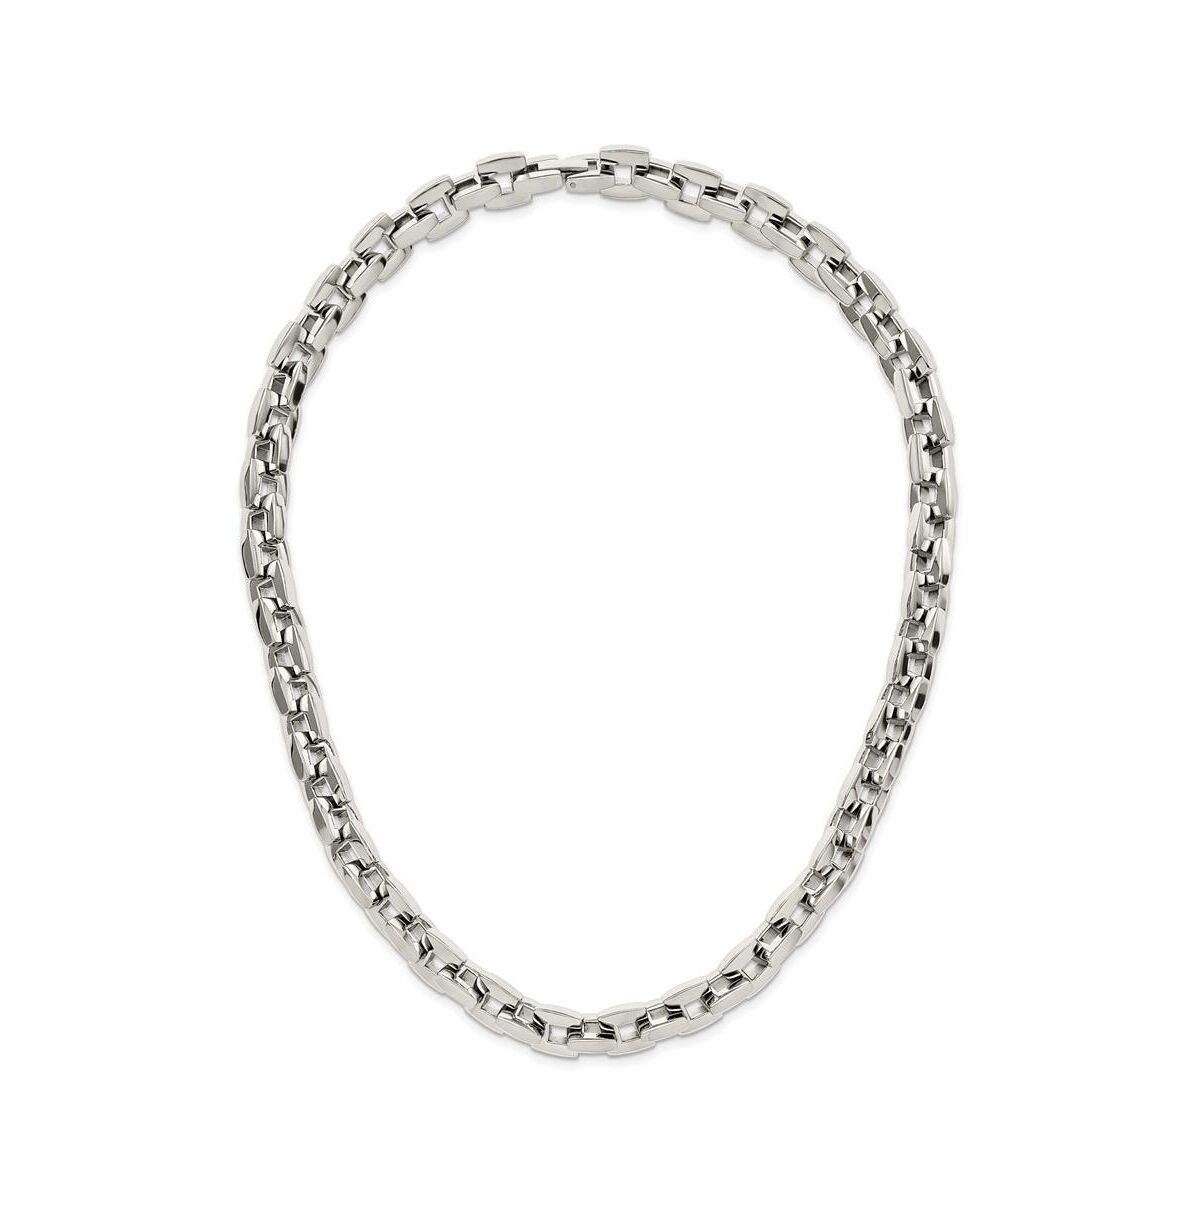 Chisel Stainless Steel 20 inch Square Link Necklace - Silver